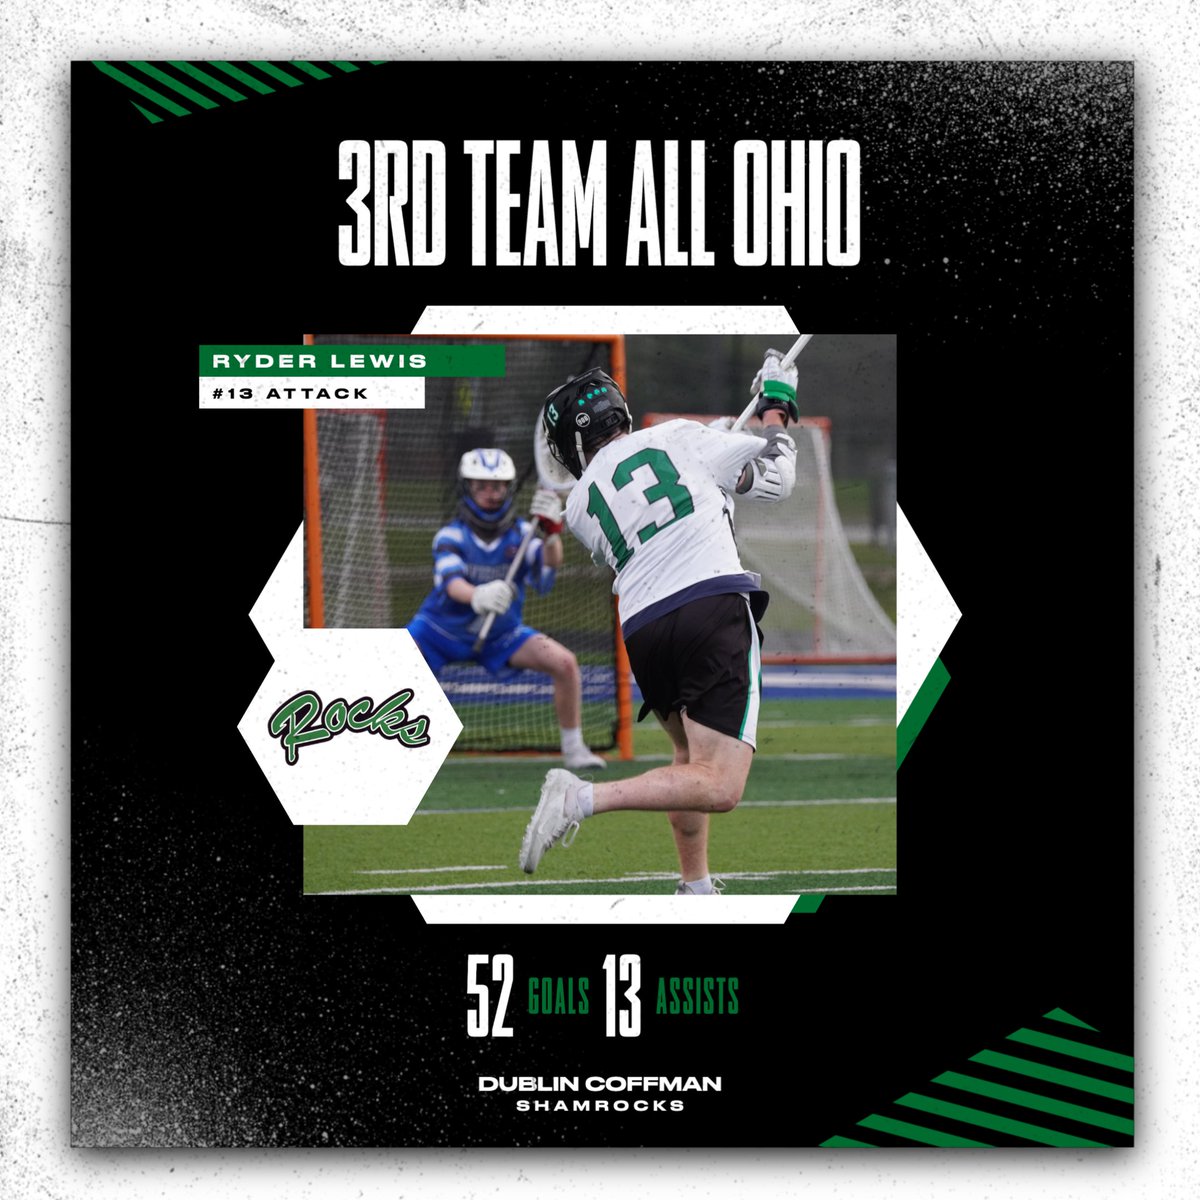 Congratulations to Junior Attack Ryder Lewis on being selected 3rd Team All State!
@RyderLewis5 
#RockPride